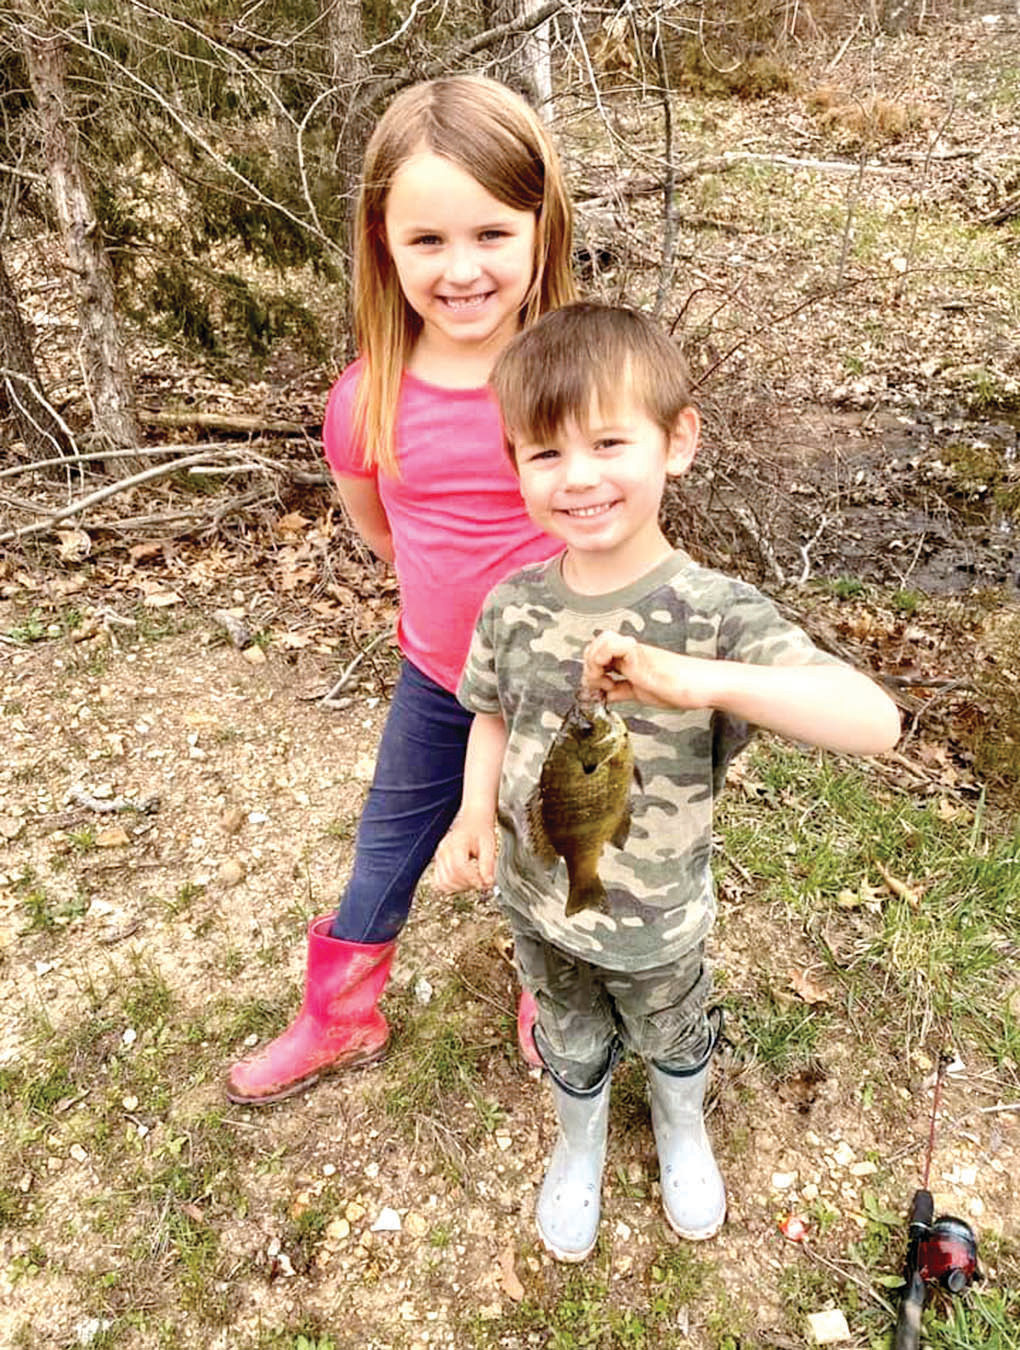 Chloe and Cooper Rikard got to go fishing with their dad, Tyler.